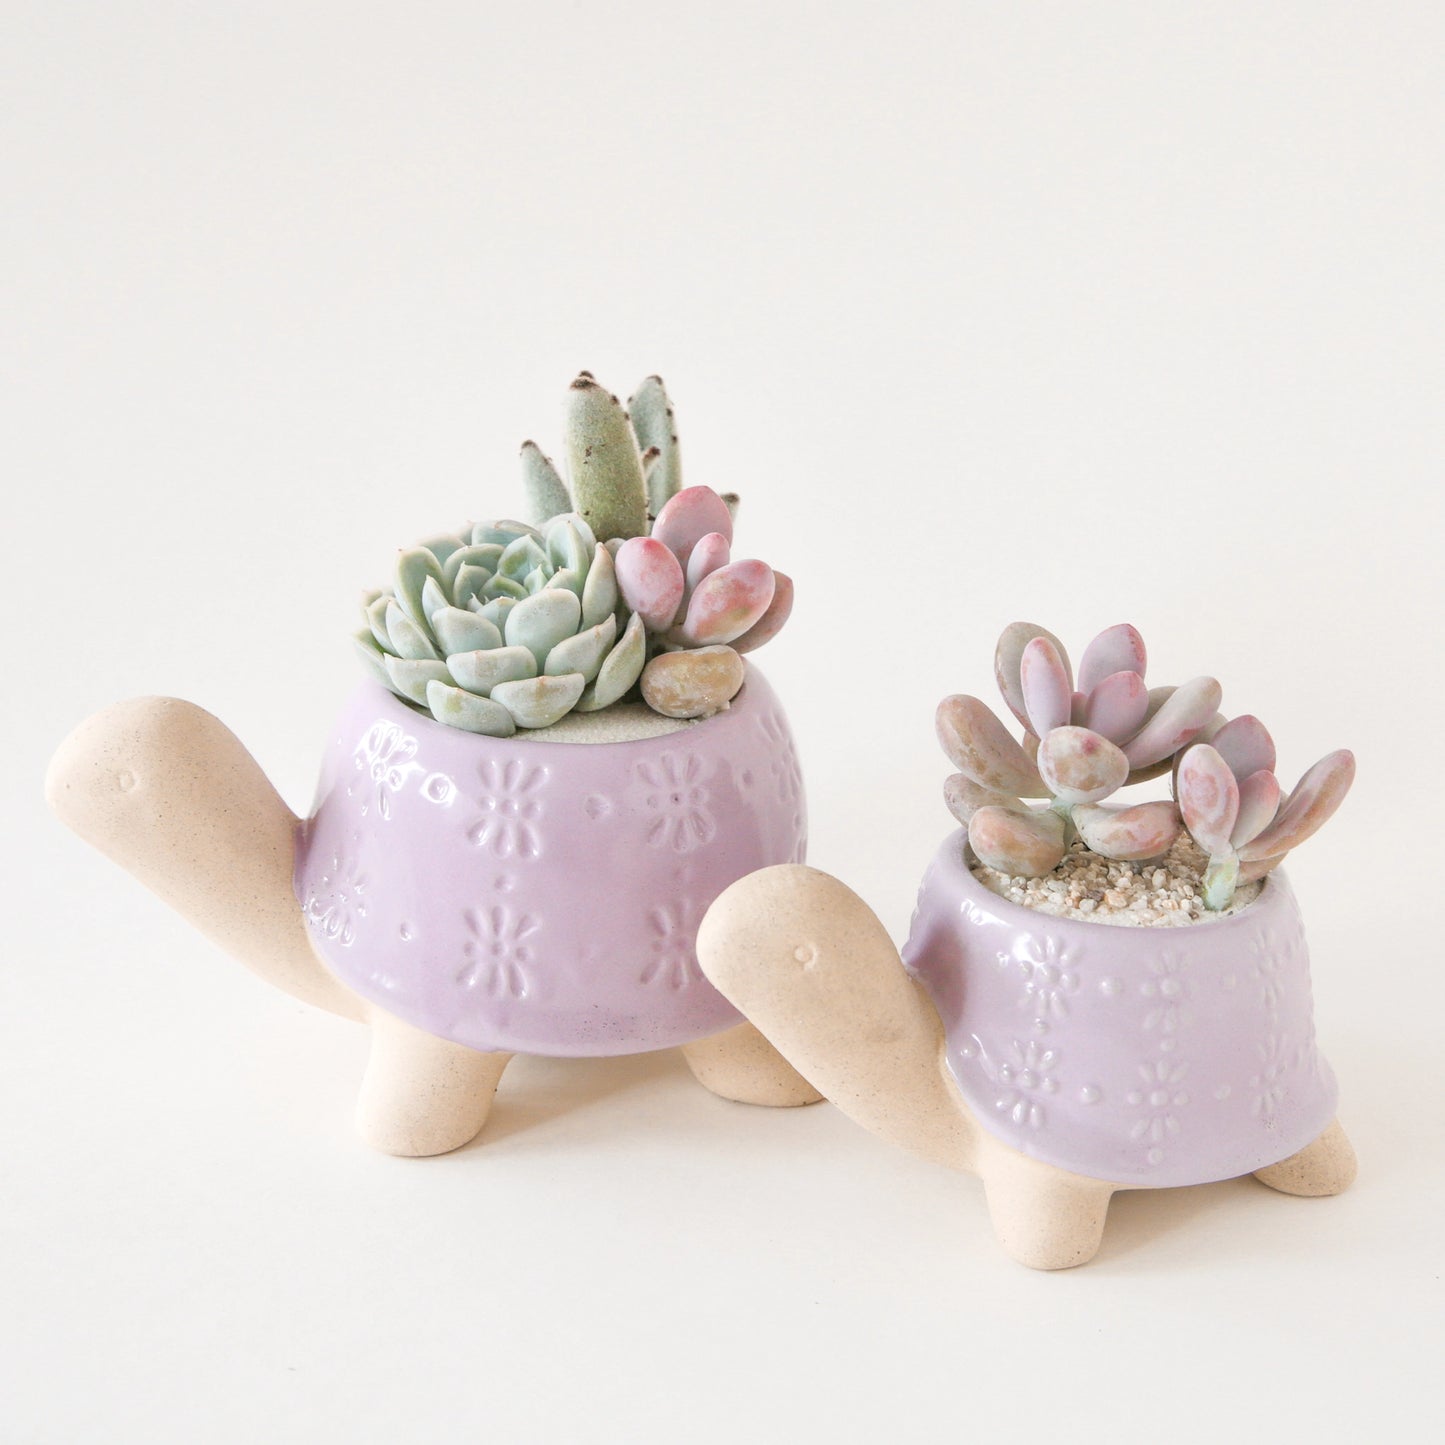 On a white background is two different sized ceramic turtle shaped planters with a lilac purple "shell" and planted with succulents not included.